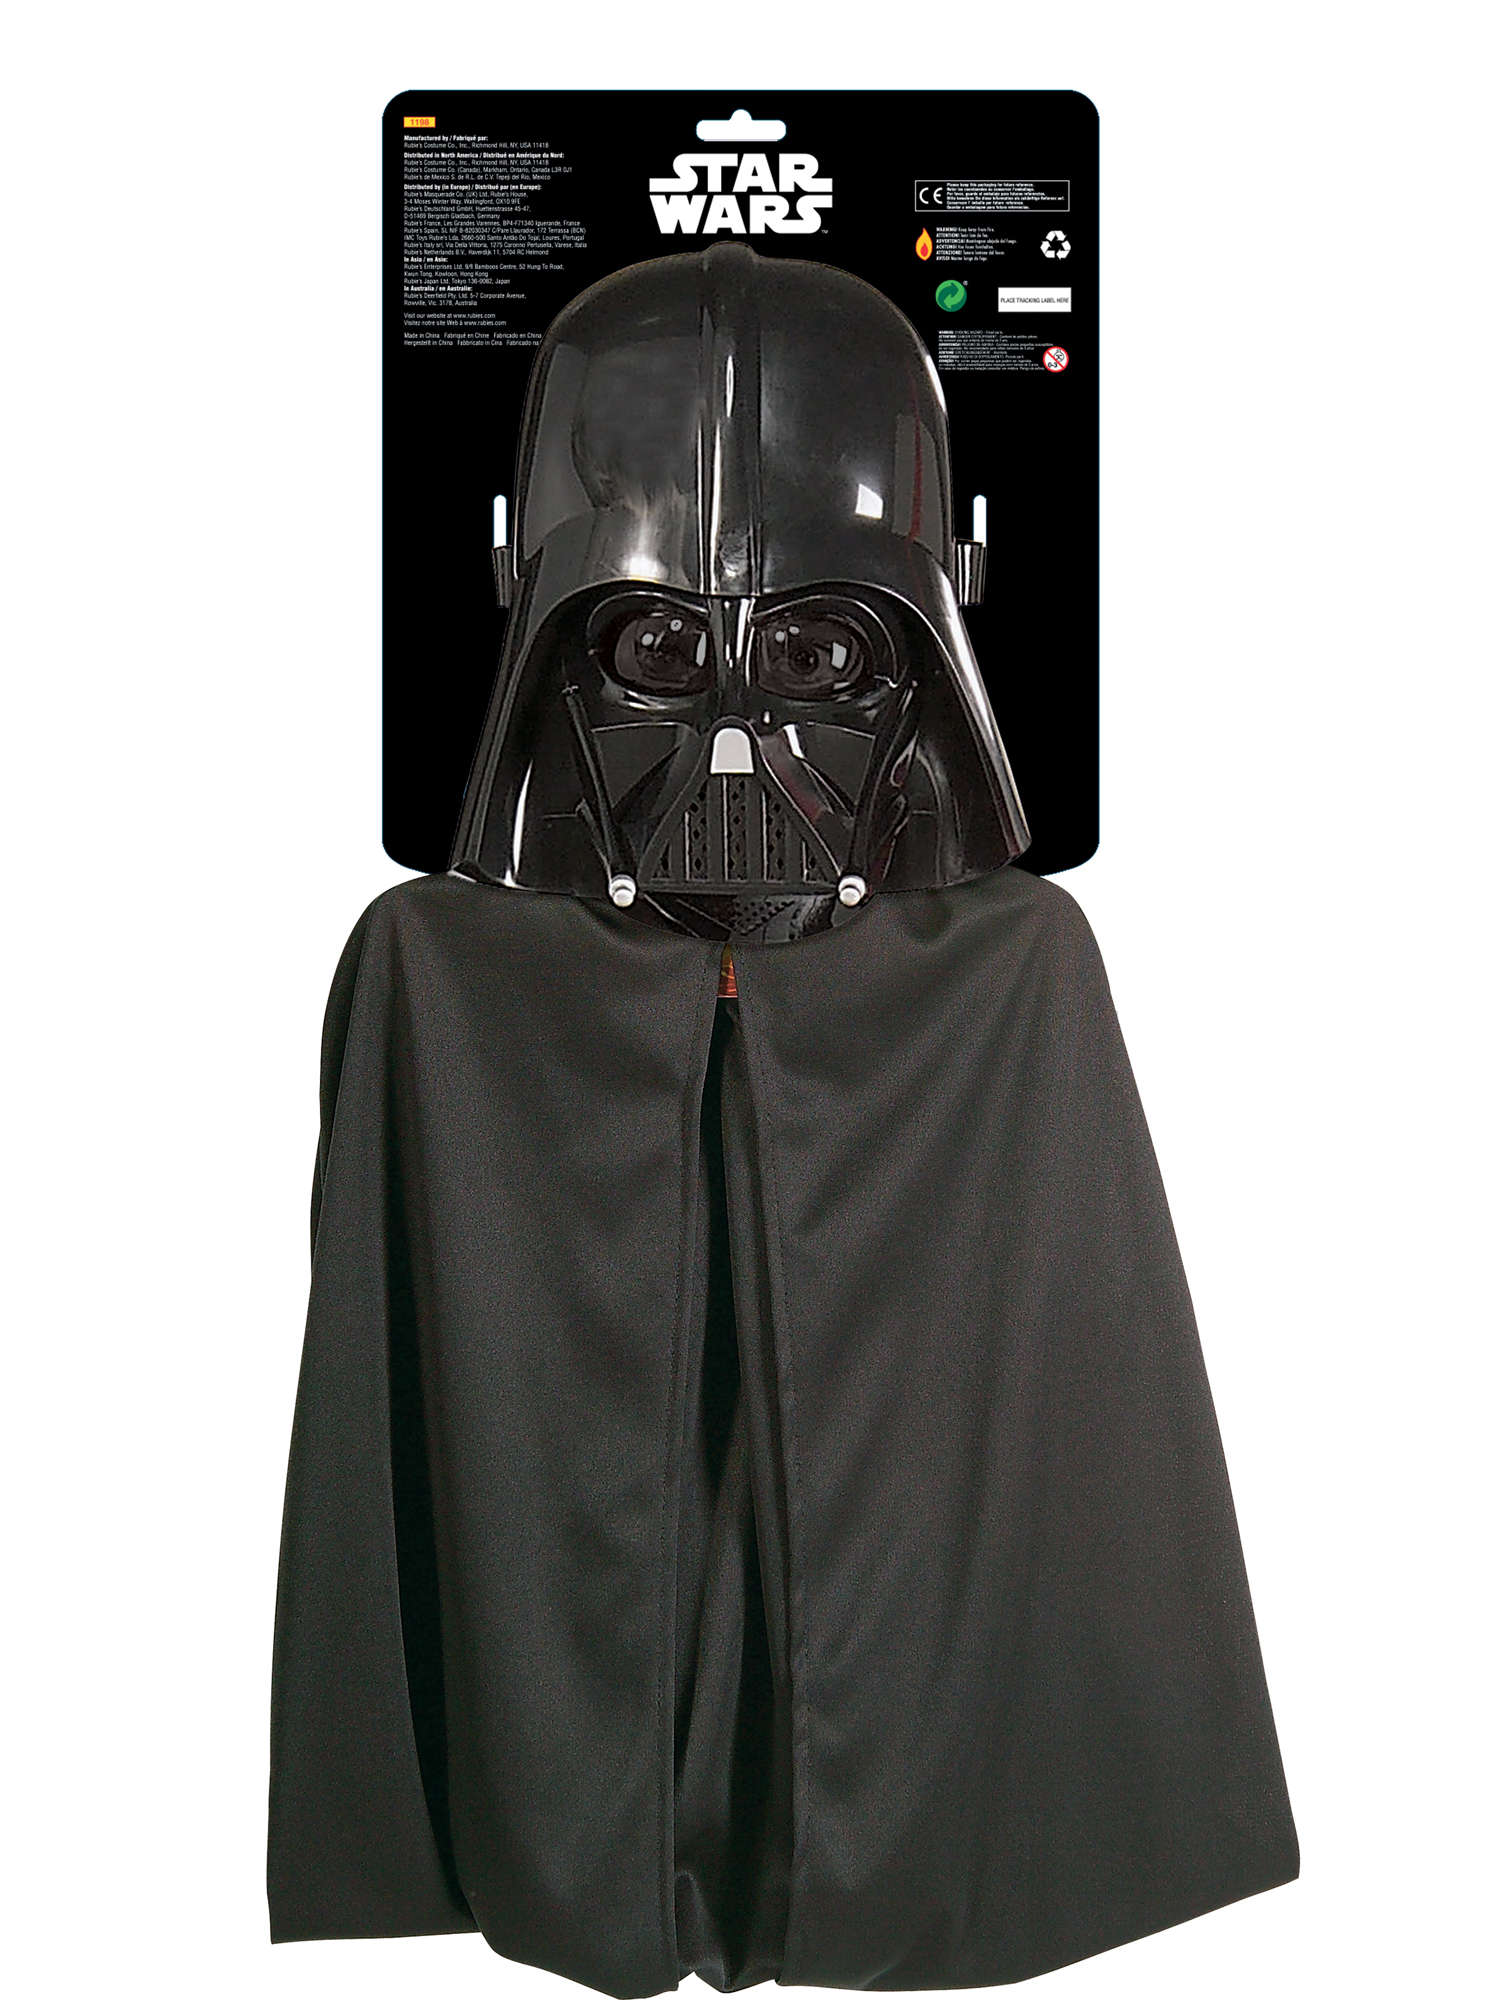 Darth Vader, Revenge Of The Sith, Episode III, Revenge Of The Sith, Multi, Star Wars, Cape, Child, Front